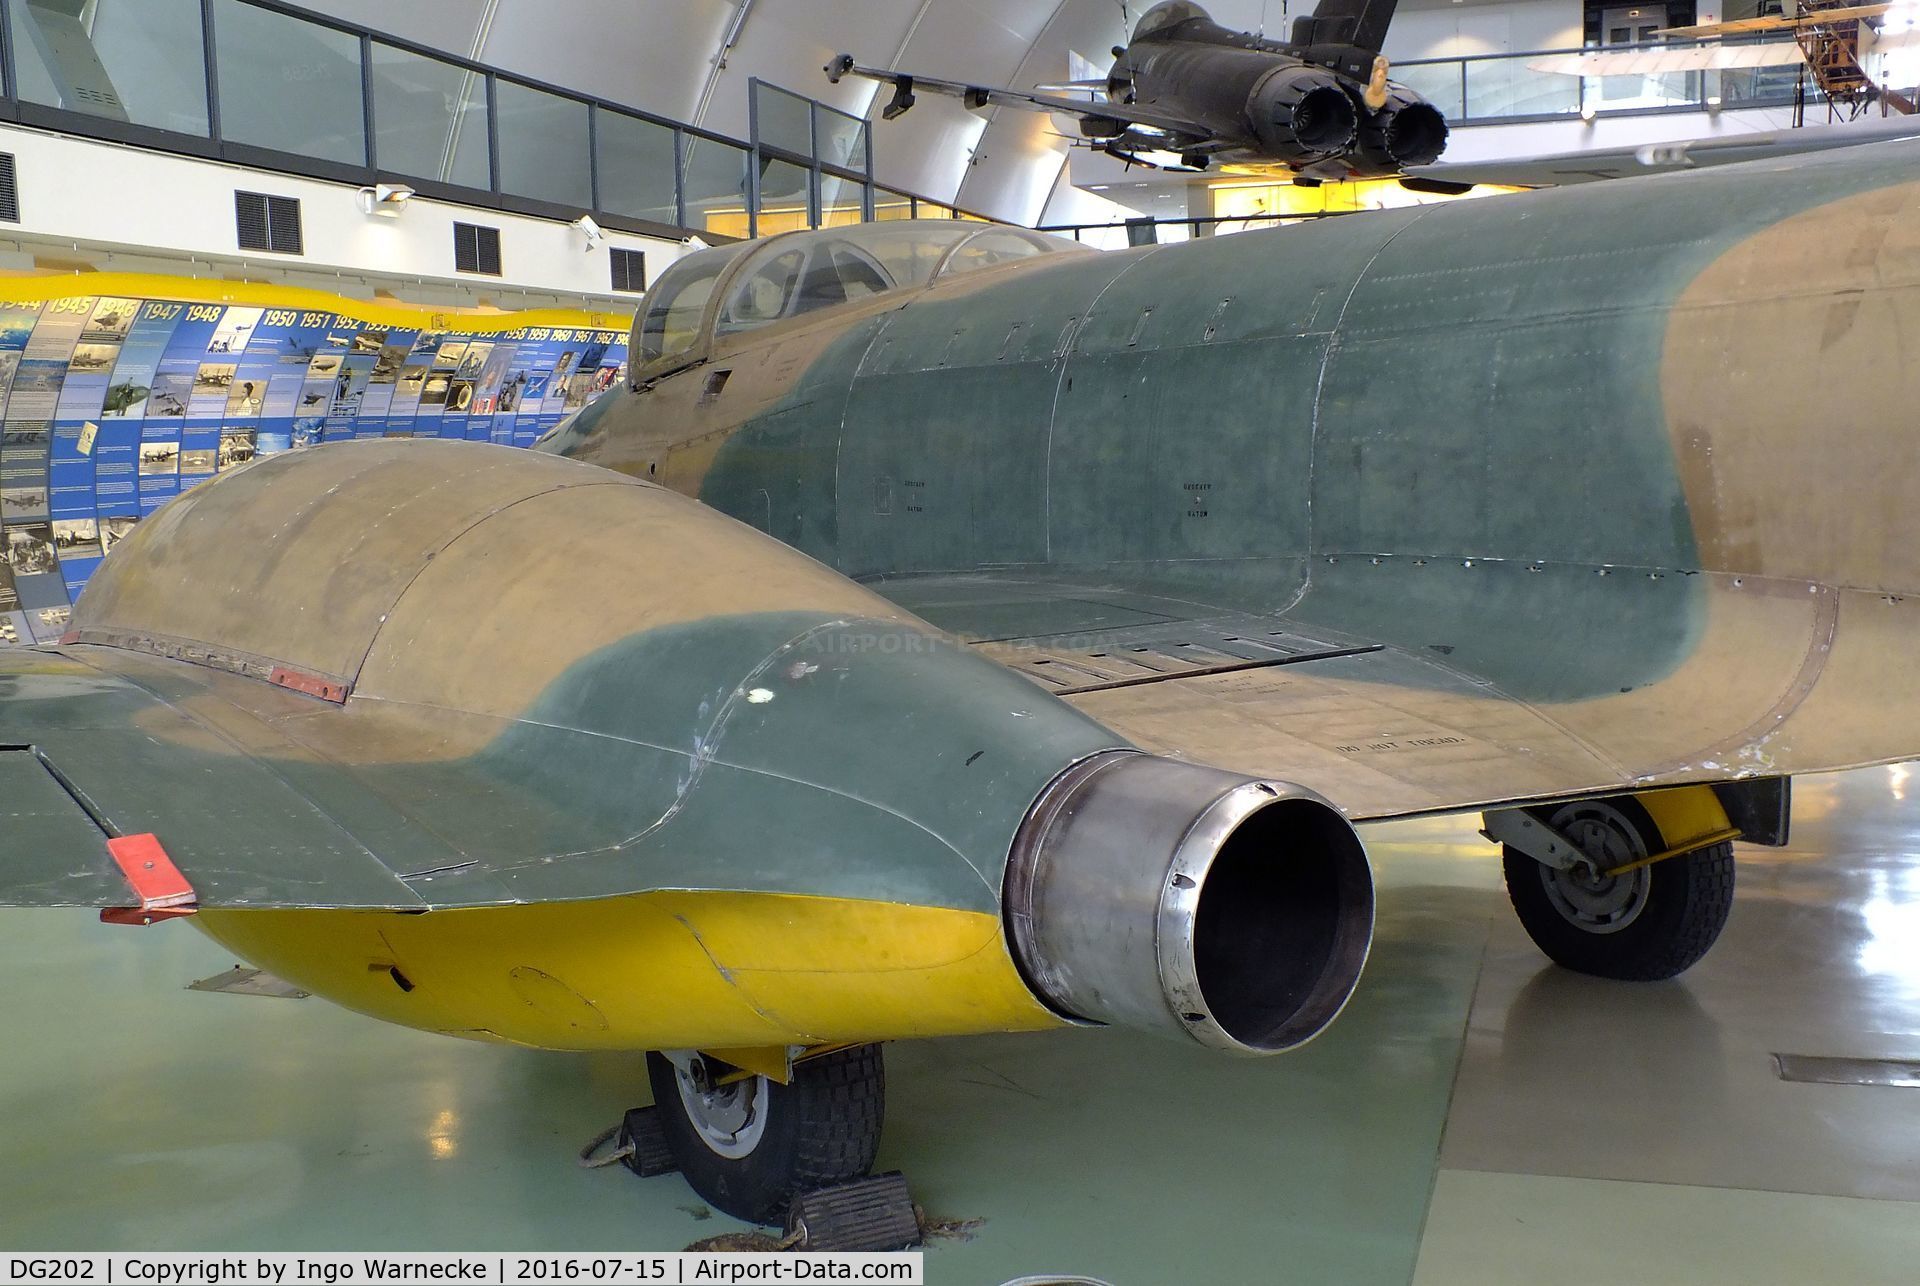 DG202, Gloster Meteor F.9/40 C/N Not found DG202, Gloster F.9/40 Meteor prototype at the RAF-Museum, Hendon